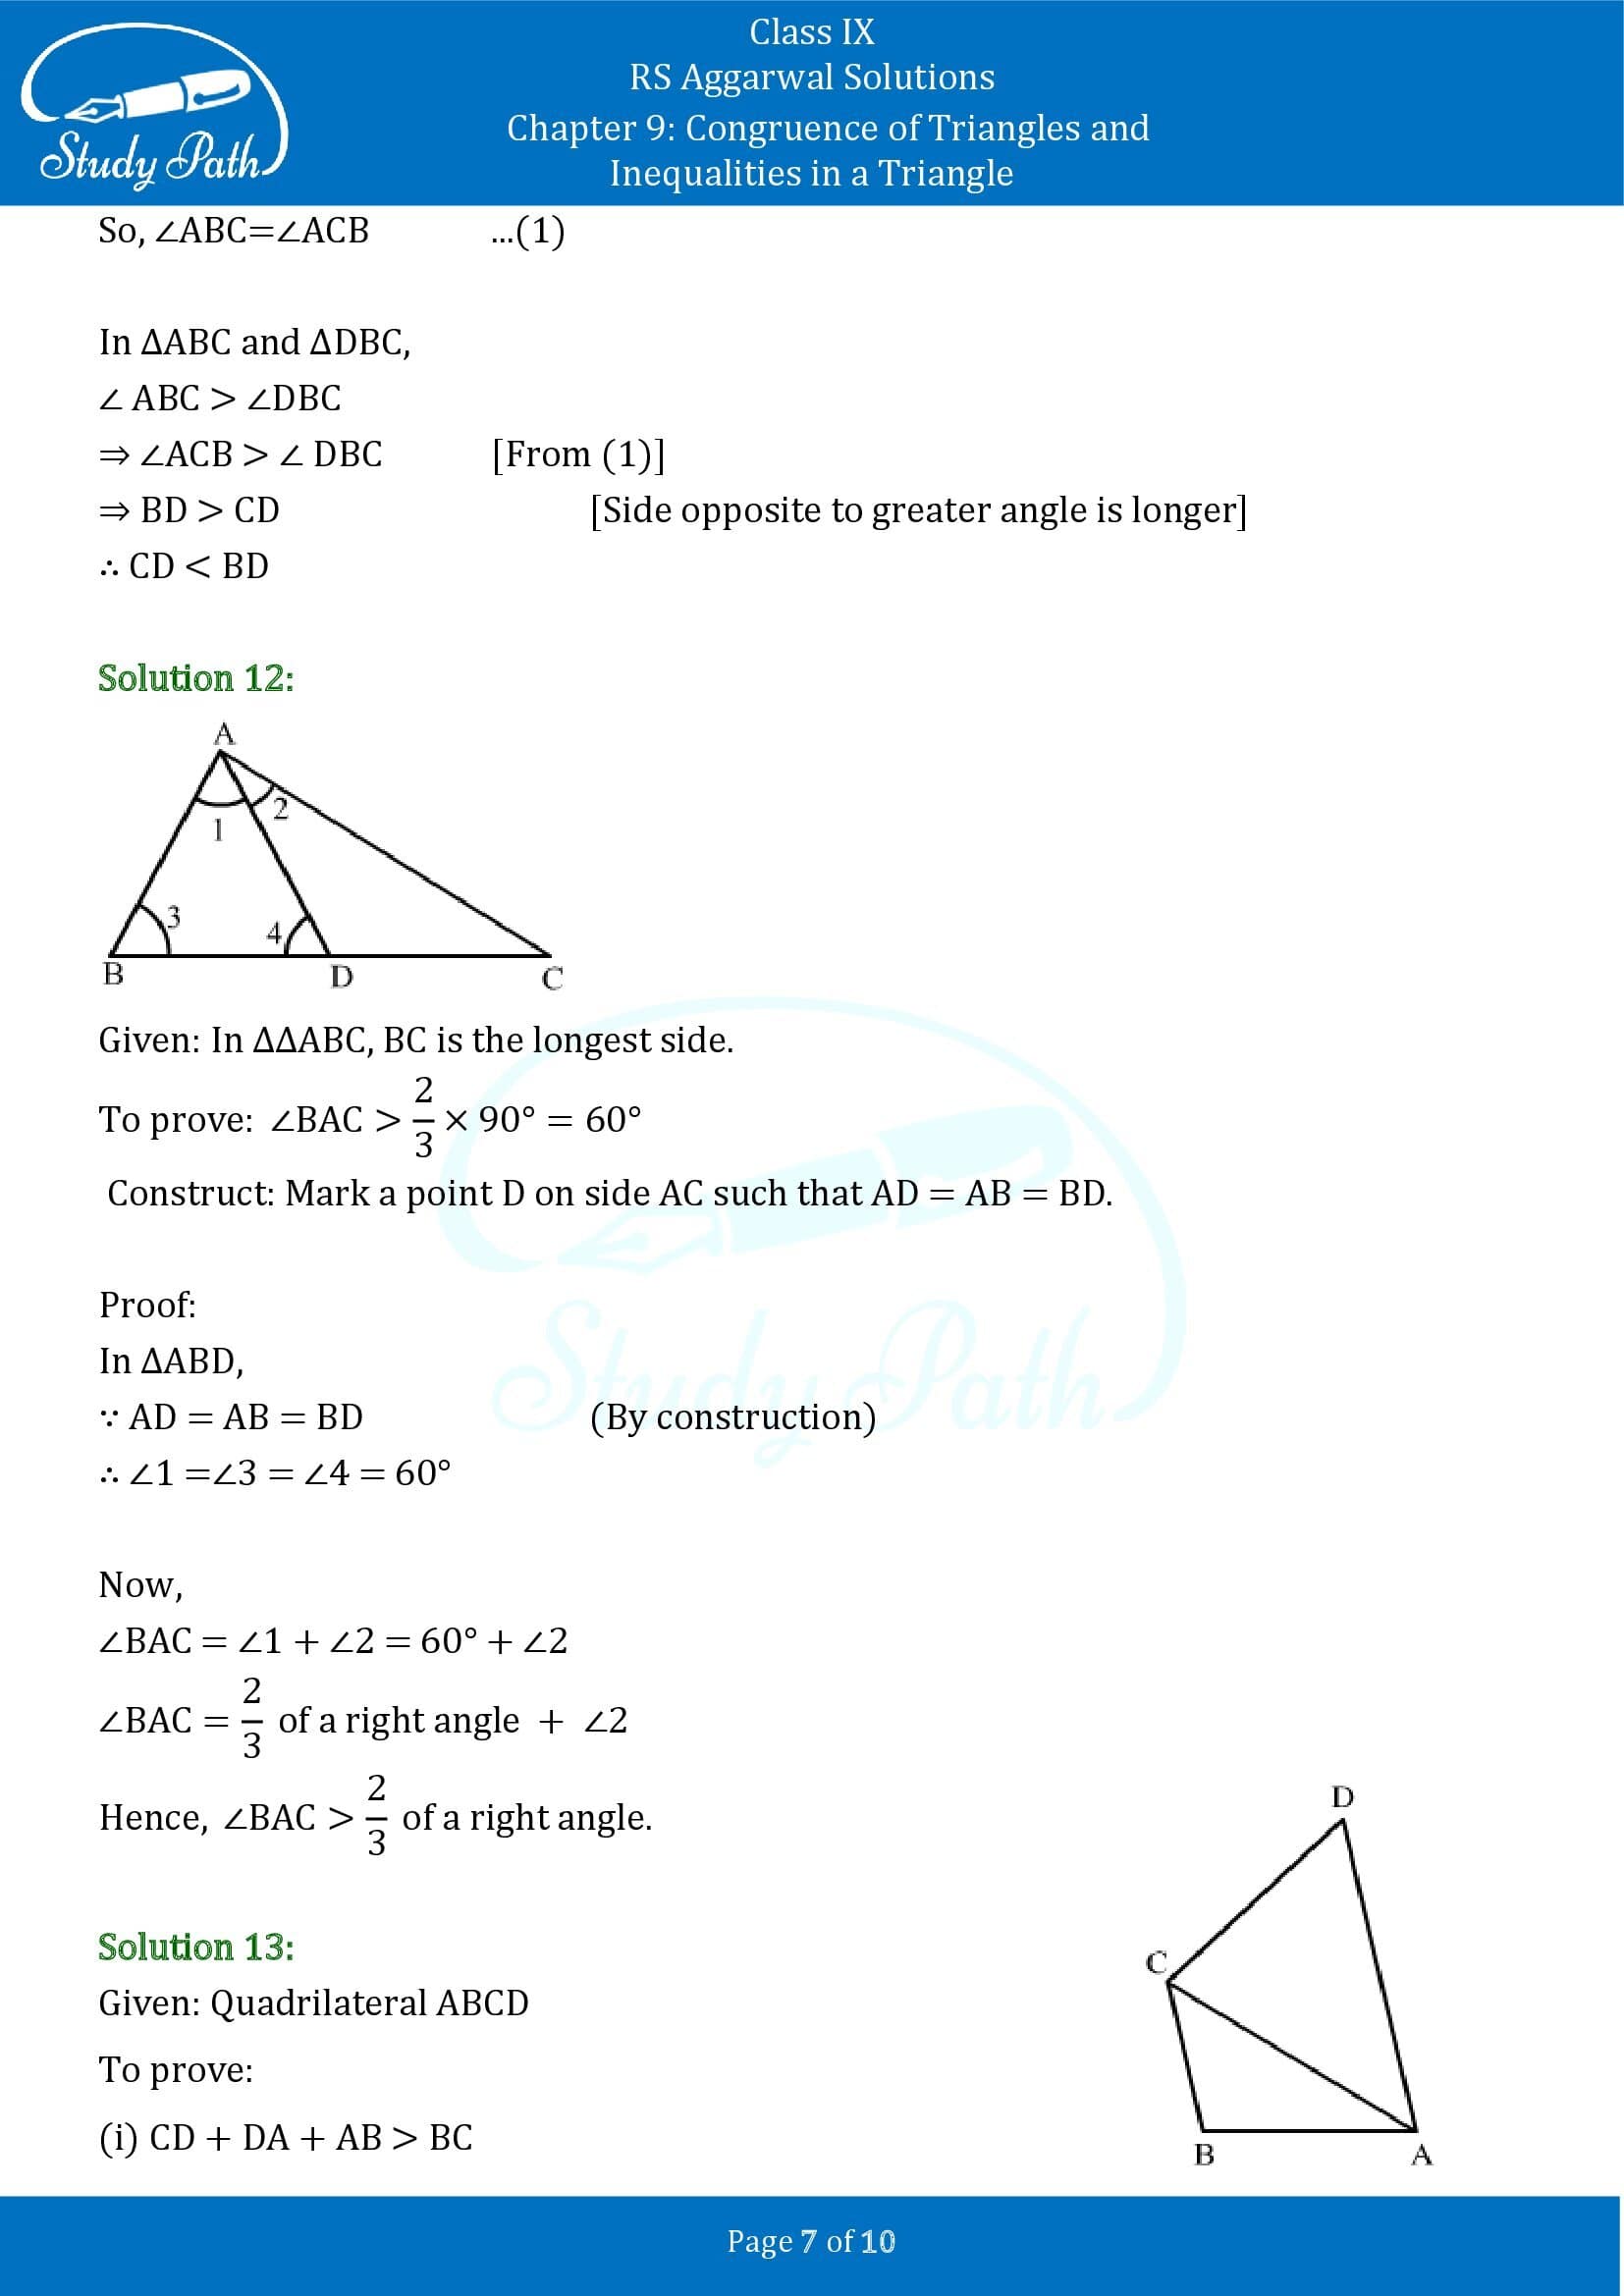 RS Aggarwal Solutions Class 9 Chapter 9 Congruence of Triangles and Inequalities in a Triangle Exercise 9B 0007